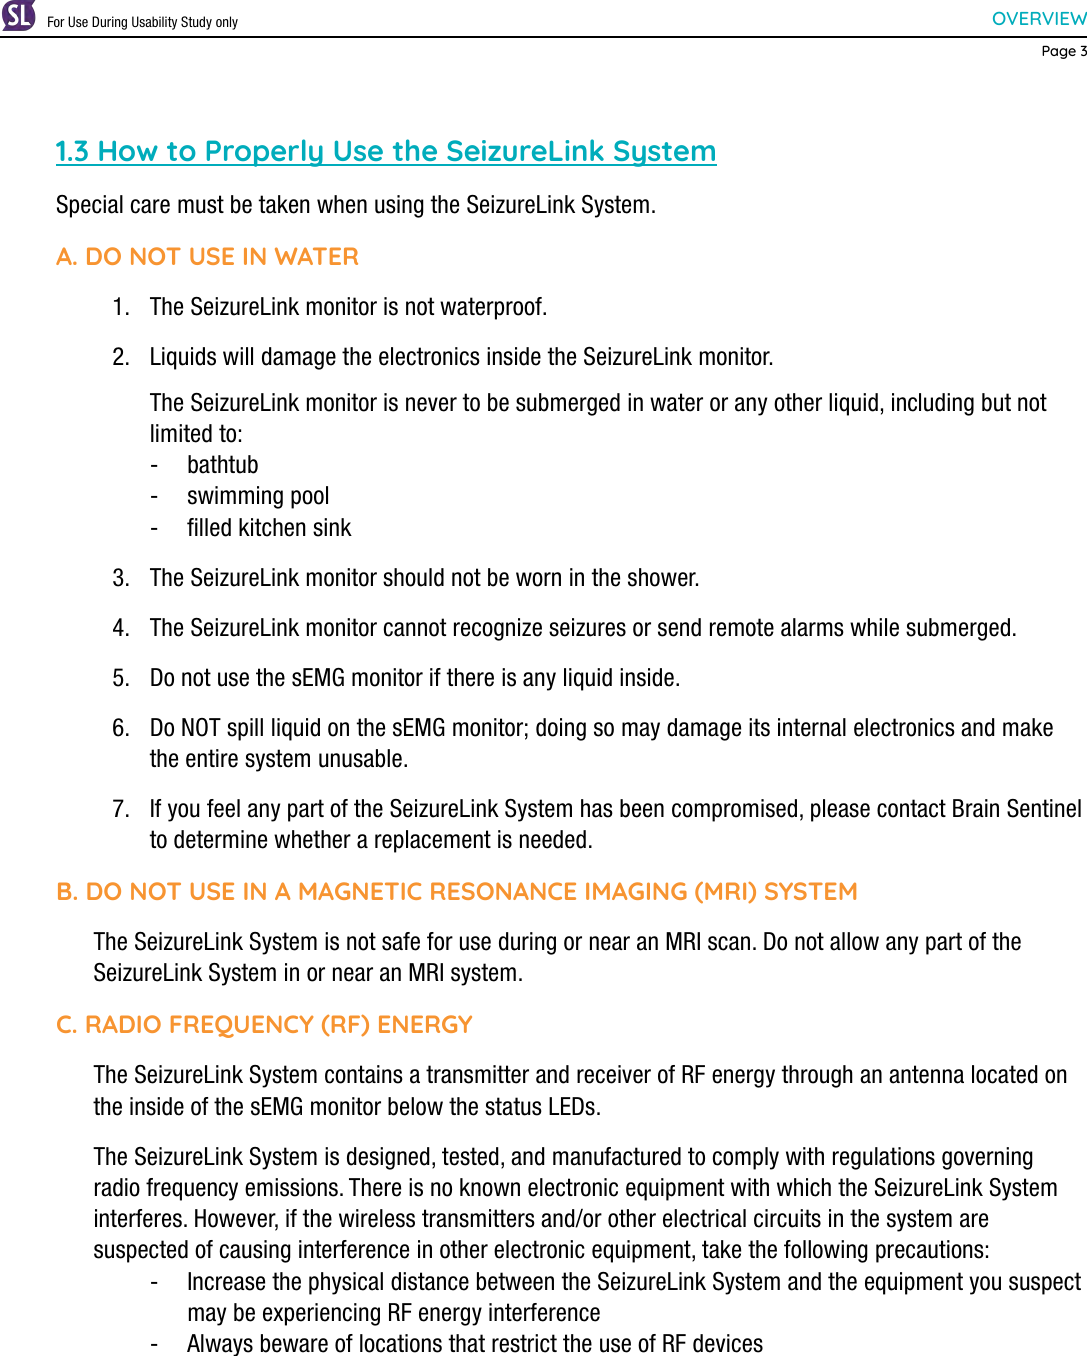 OVERVIEWPage 31.3 How to Properly Use the SeizureLink SystemSpecial care must be taken when using the SeizureLink System.A. DO NOT USE IN WATER1.  The SeizureLink monitor is not waterproof.2.  Liquids will damage the electronics inside the SeizureLink monitor.  The SeizureLink monitor is never to be submerged in water or any other liquid, including but not limited to: - bathtub - swimming pool - ﬁlled kitchen sink3.  The SeizureLink monitor should not be worn in the shower.4.  The SeizureLink monitor cannot recognize seizures or send remote alarms while submerged.5.  Do not use the sEMG monitor if there is any liquid inside.6.  Do NOT spill liquid on the sEMG monitor; doing so may damage its internal electronics and make the entire system unusable.7.  If you feel any part of the SeizureLink System has been compromised, please contact Brain Sentinel to determine whether a replacement is needed.B. DO NOT USE IN A MAGNETIC RESONANCE IMAGING (MRI) SYSTEMThe SeizureLink System is not safe for use during or near an MRI scan. Do not allow any part of the SeizureLink System in or near an MRI system.C. RADIO FREQUENCY (RF) ENERGYThe SeizureLink System contains a transmitter and receiver of RF energy through an antenna located on the inside of the sEMG monitor below the status LEDs.The SeizureLink System is designed, tested, and manufactured to comply with regulations governing radio frequency emissions. There is no known electronic equipment with which the SeizureLink System interferes. However, if the wireless transmitters and/or other electrical circuits in the system are suspected of causing interference in other electronic equipment, take the following precautions: - Increase the physical distance between the SeizureLink System and the equipment you suspect may be experiencing RF energy interference - Always beware of locations that restrict the use of RF devicesFor Use During Usability Study only